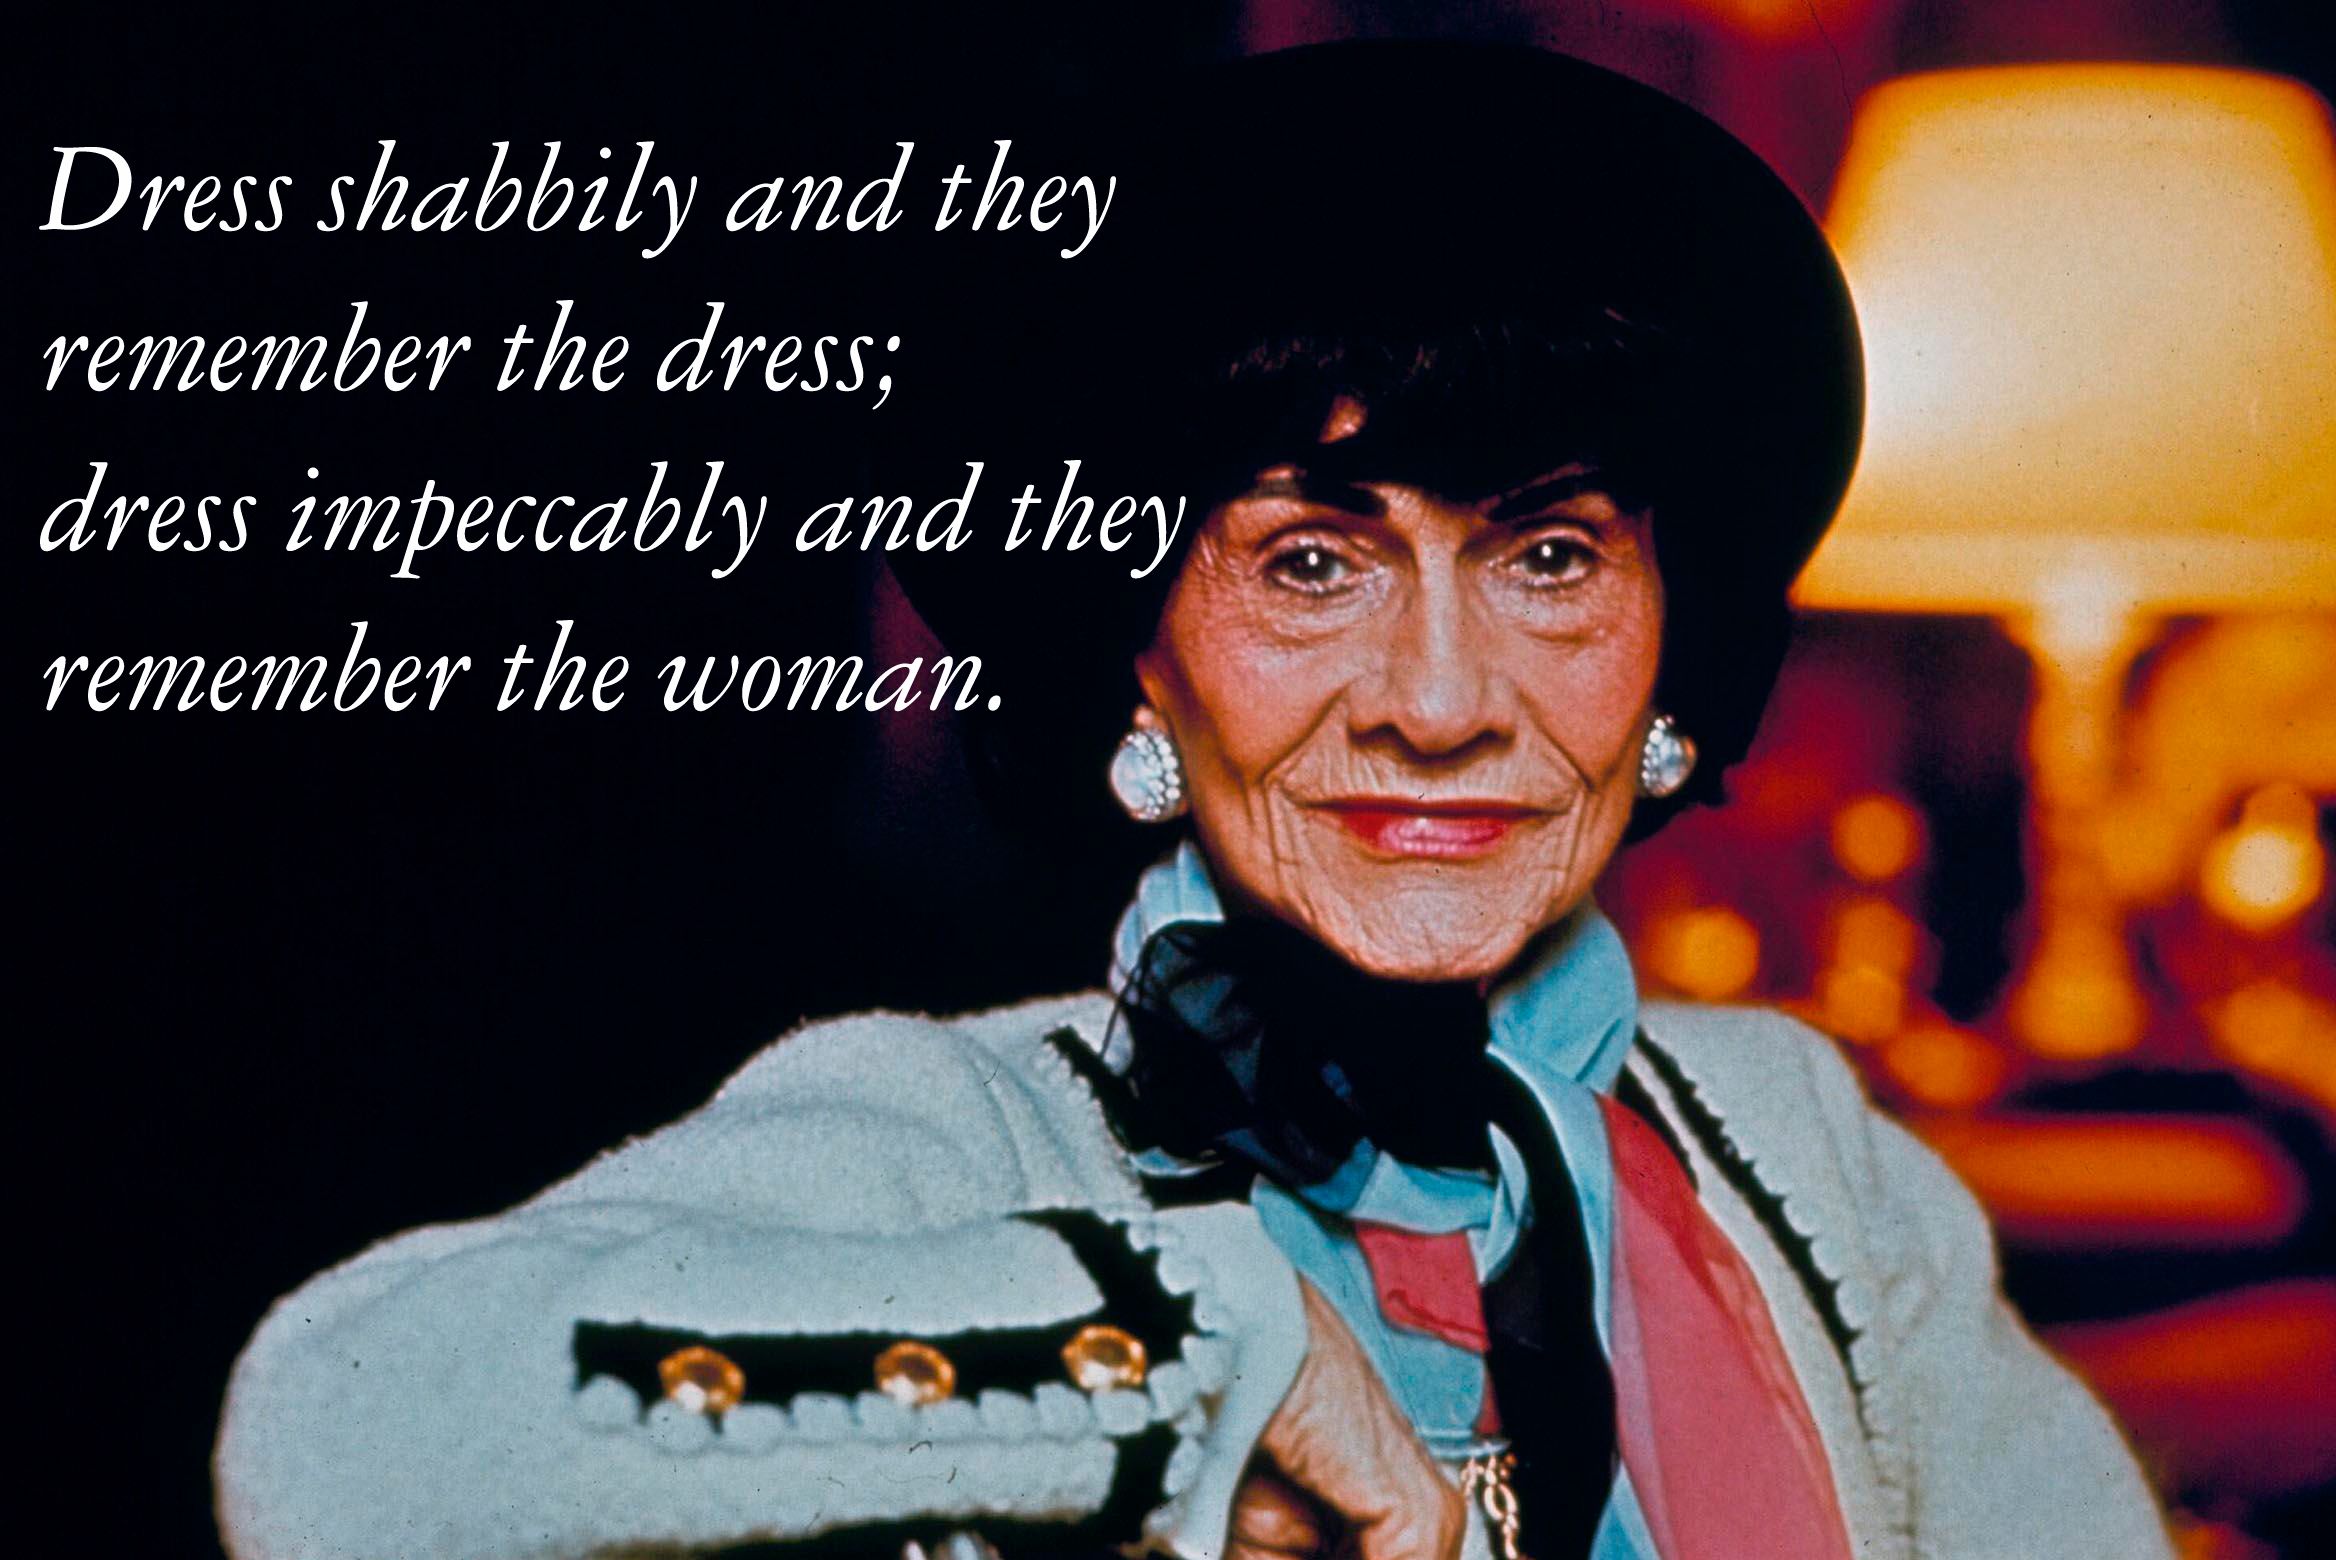 Chi tiết 88 coco chanel famous quotes tuyệt vời nhất  trieuson5